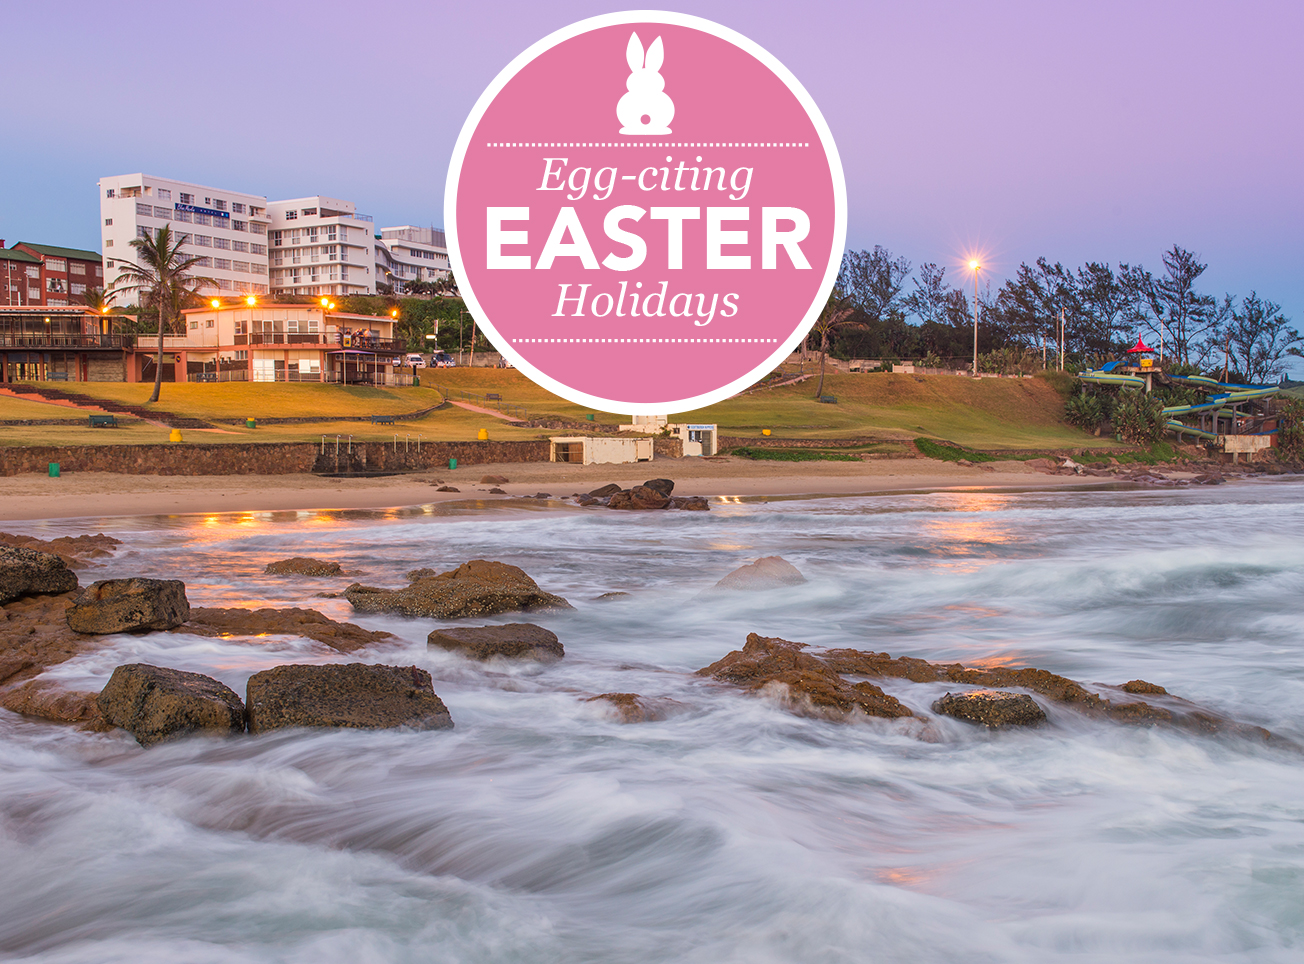 egg-citing Easter holiday - Blue Marlin Hotel